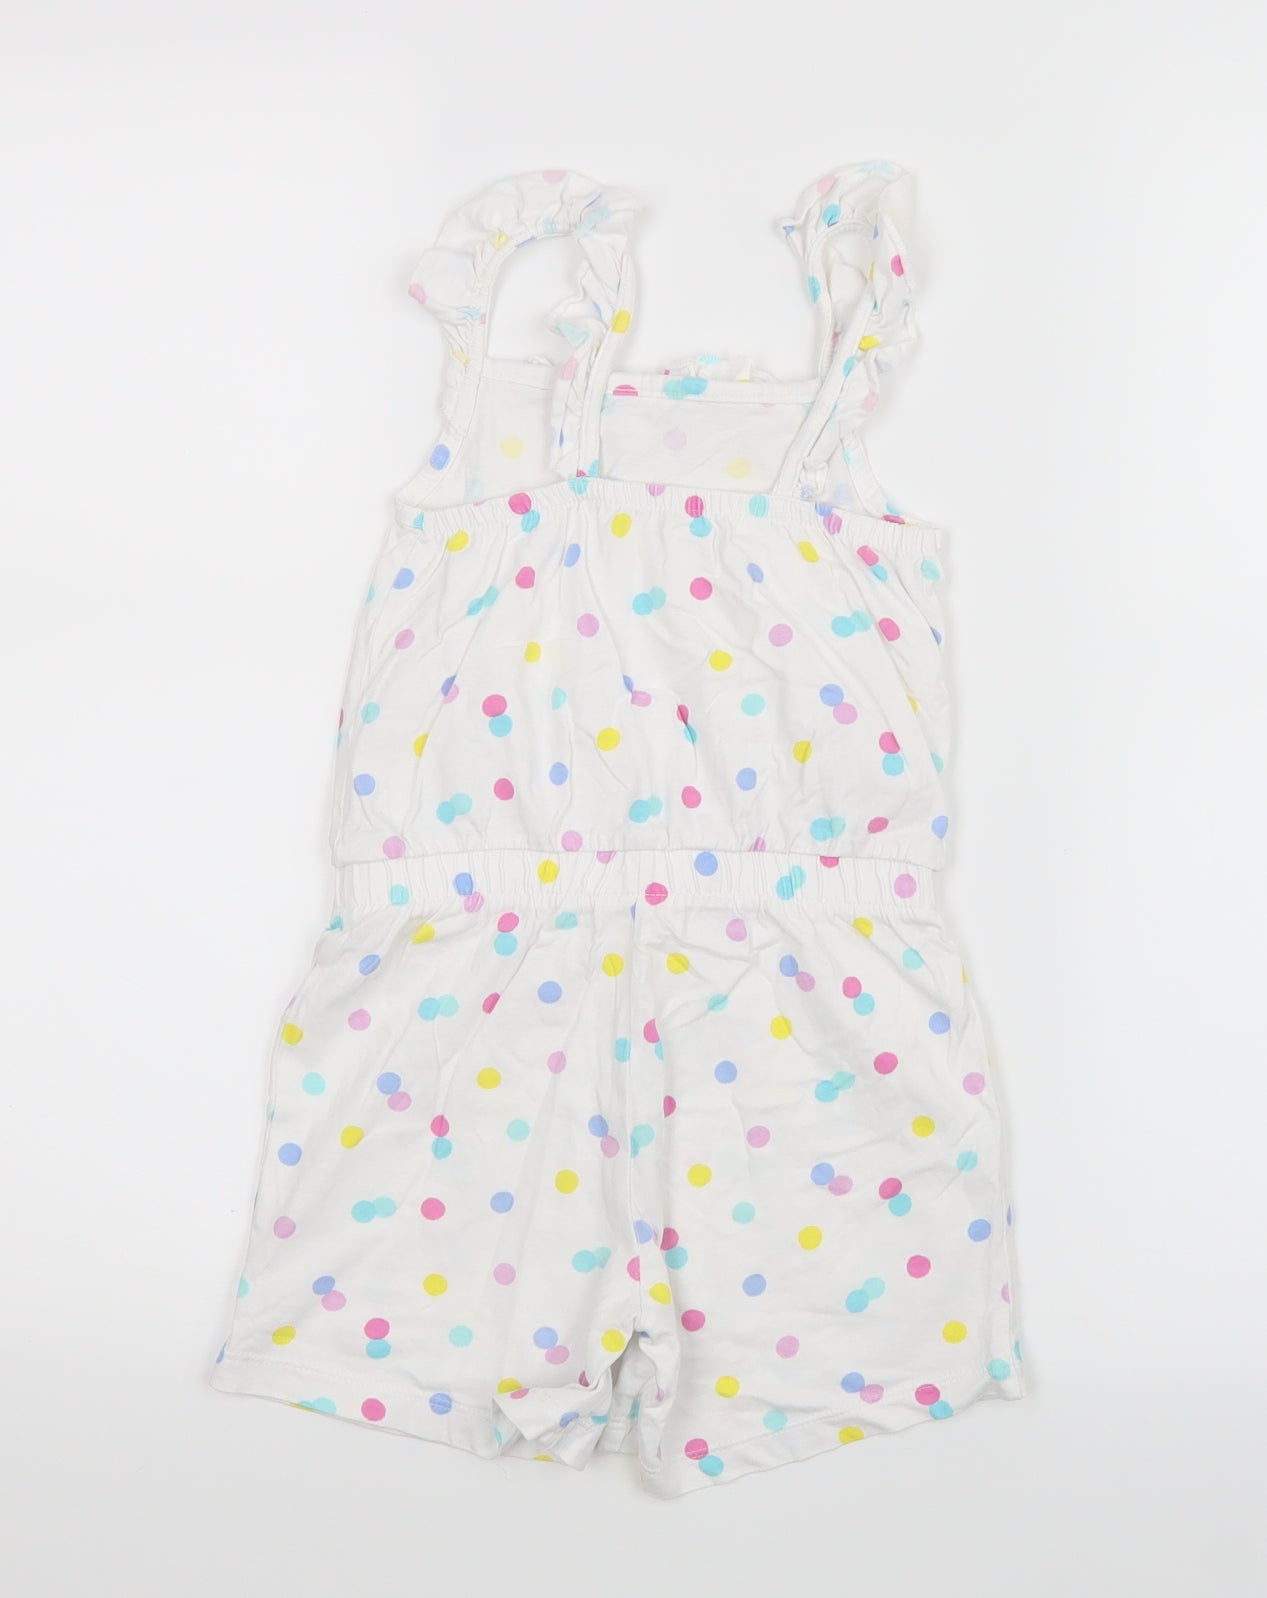 George Girls White Polka Dot  Playsuit One-Piece Size 5-6 Years